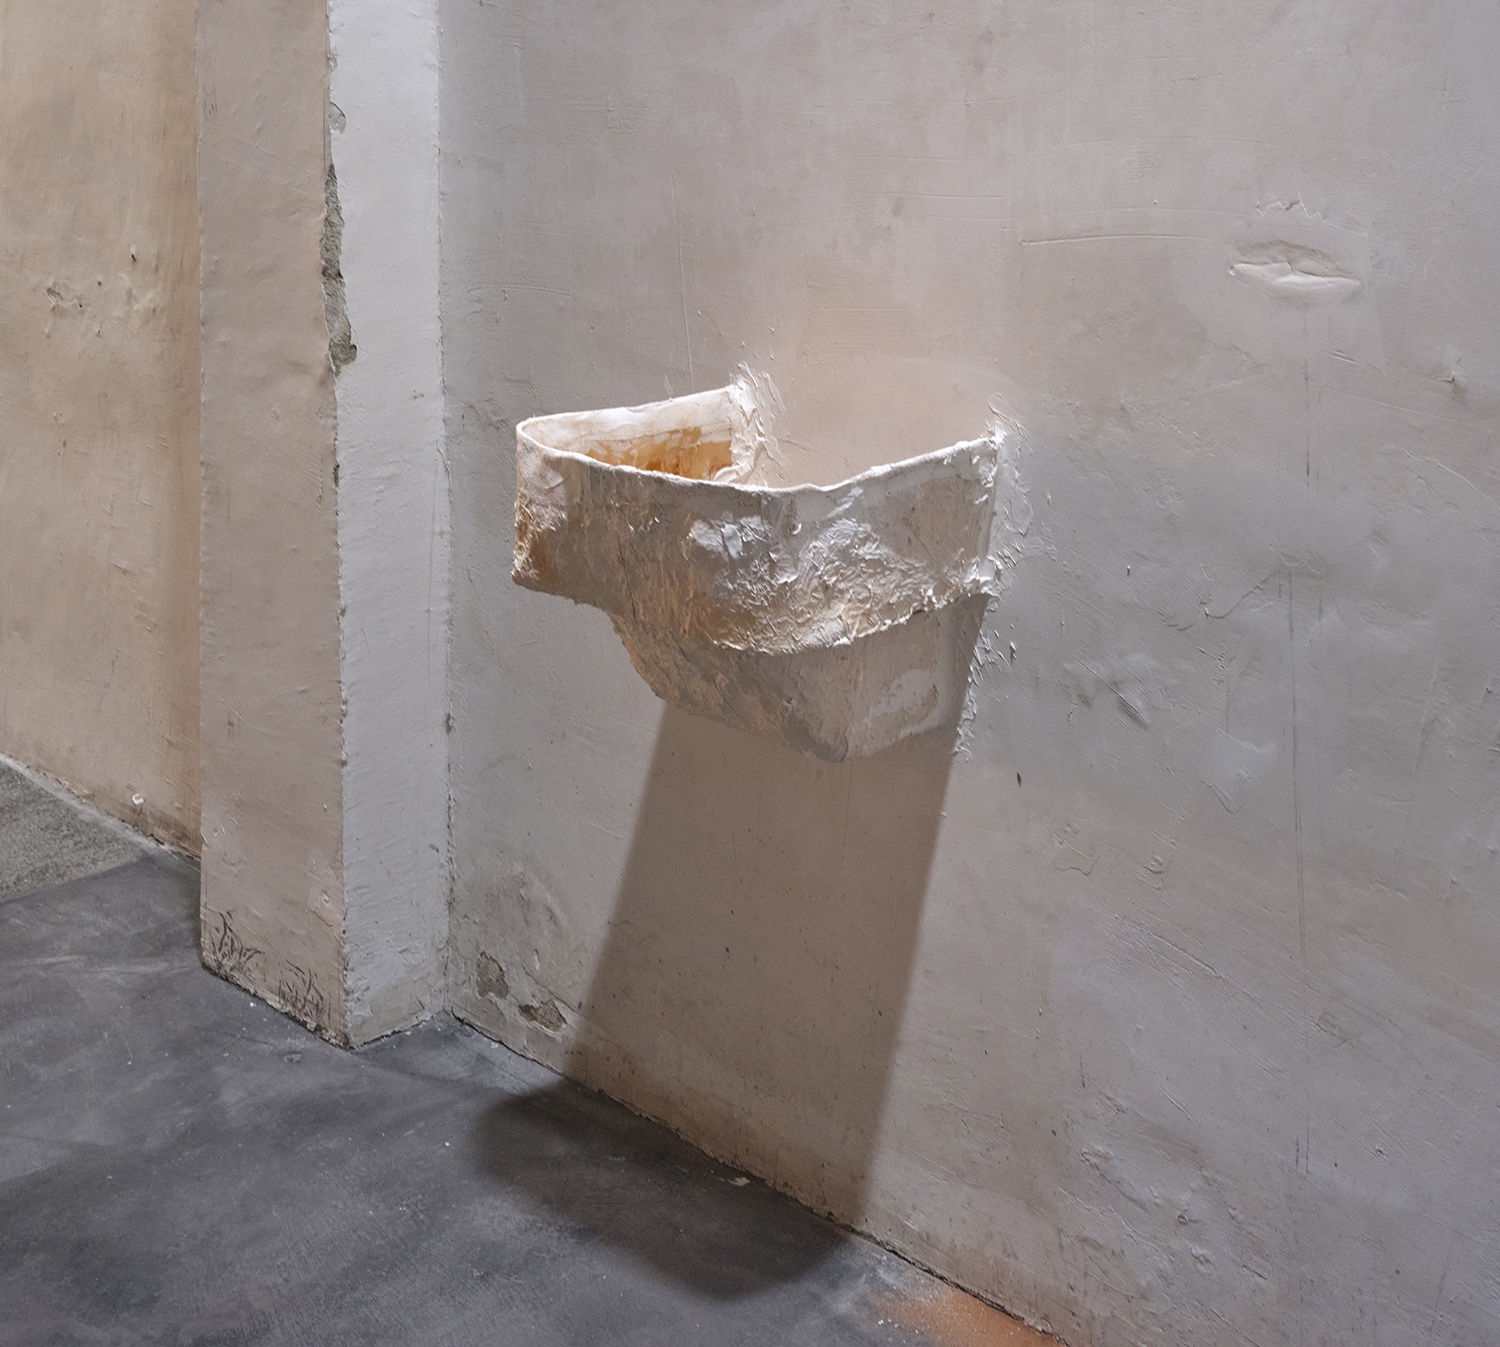 Ian Waelder. From hip to fingertip (Opel upside down), 2022. Remainder of the mould of the Opel Olympia sculpture made in collab between the artist and his father, putty on wall, iron rods, remains of the wall on the floor. 33,5 x 35,5 x 30 cm.